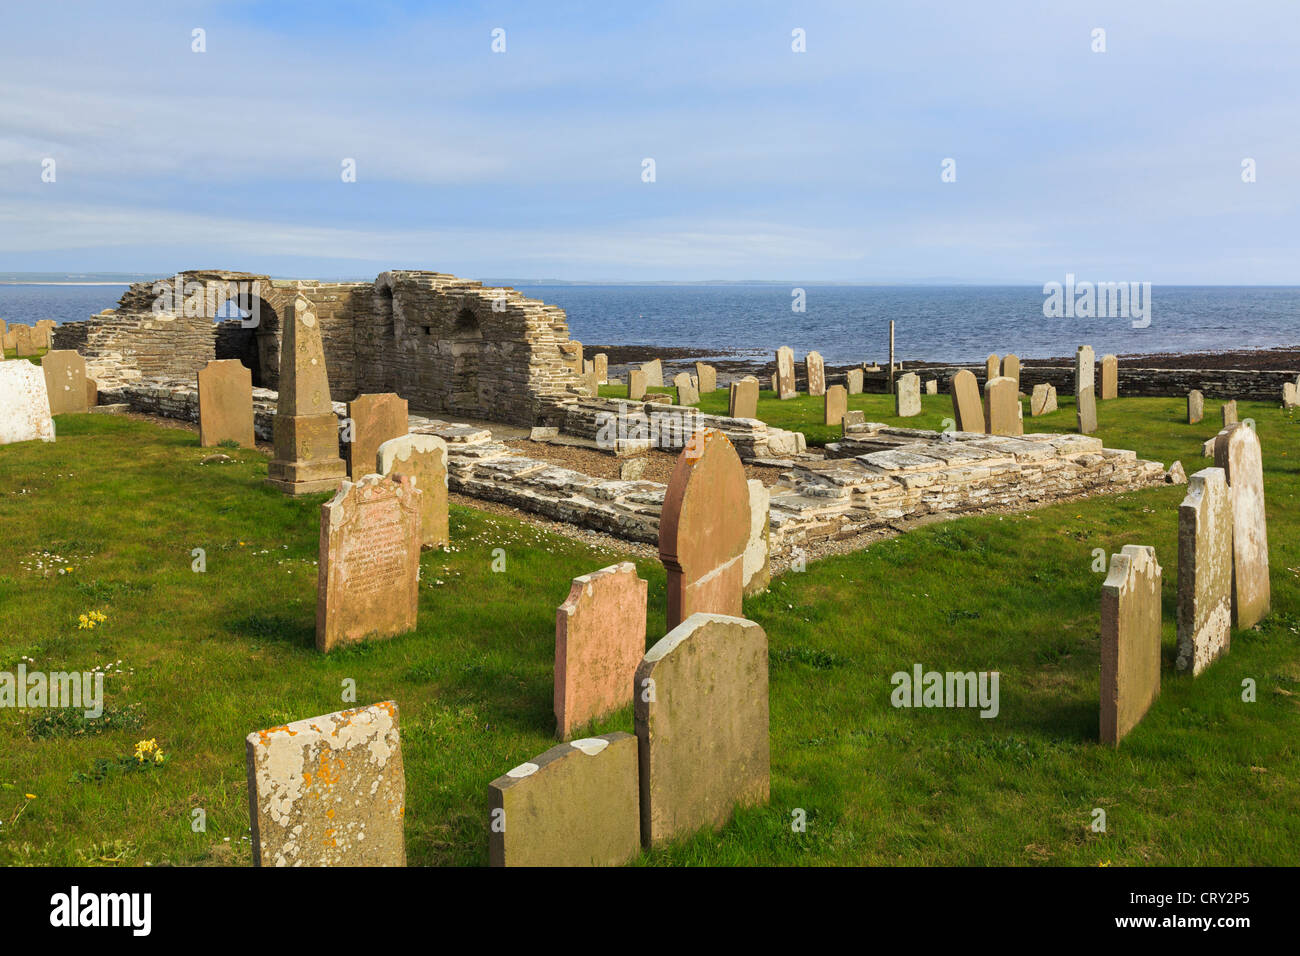 Cross Kirk church ruins with gravestones in the churchyard at Tuquoy, Westray Island, Orkney Islands, Scotland, UK Stock Photo